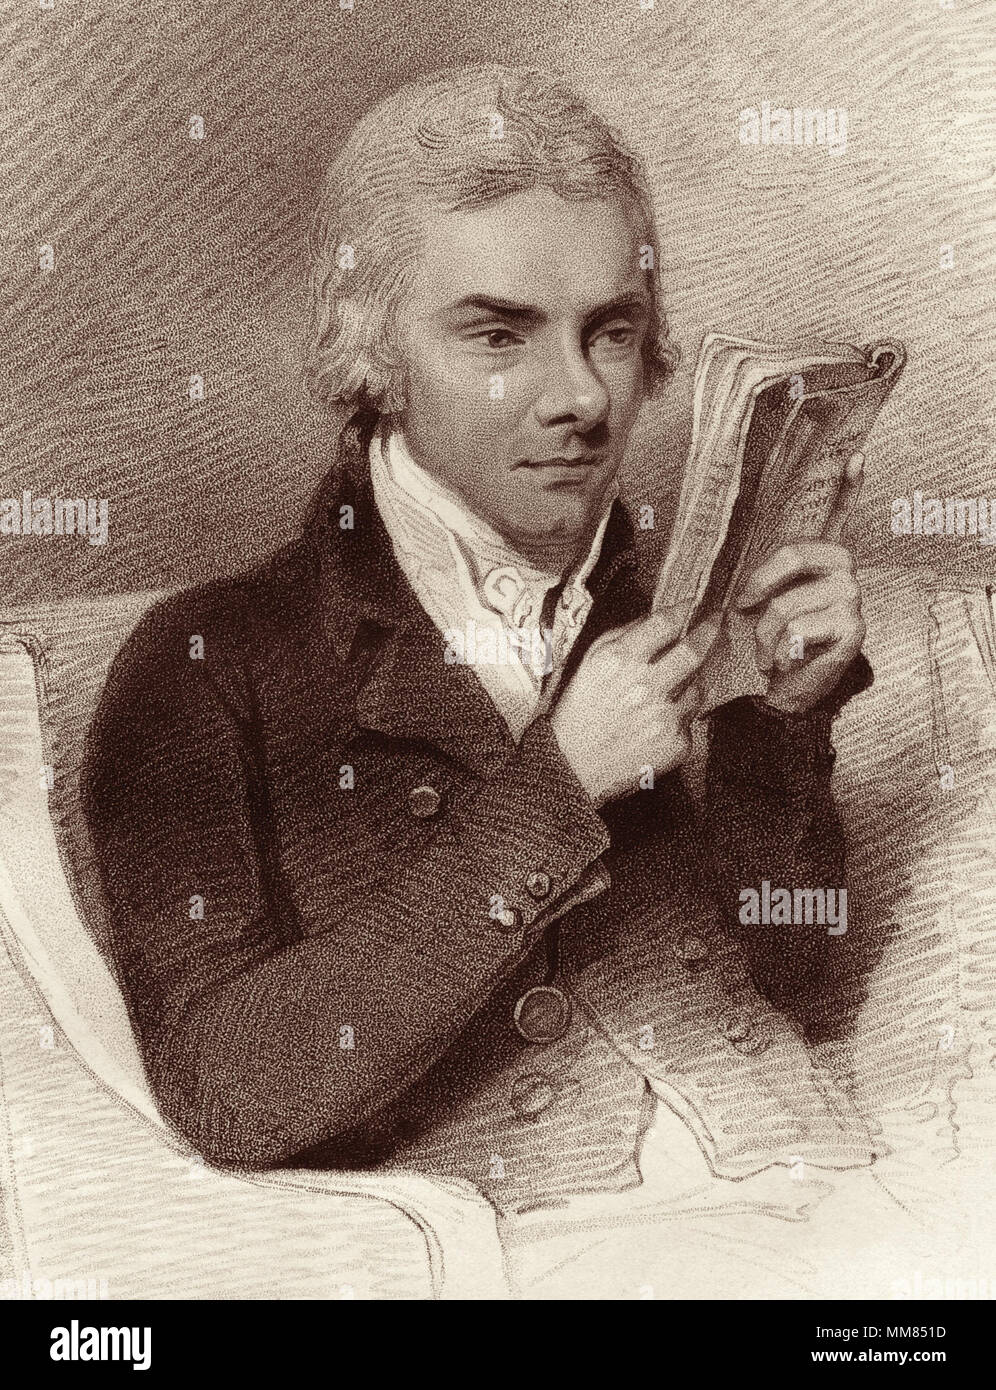 William Wilberforce (1759-1833), a British politician, evangelical Christian and leading abolitionist in the 18th and 19th century, in an 1809 engraving by Geovanni Vendramini from artwork by Henry Edridge. Stock Photo